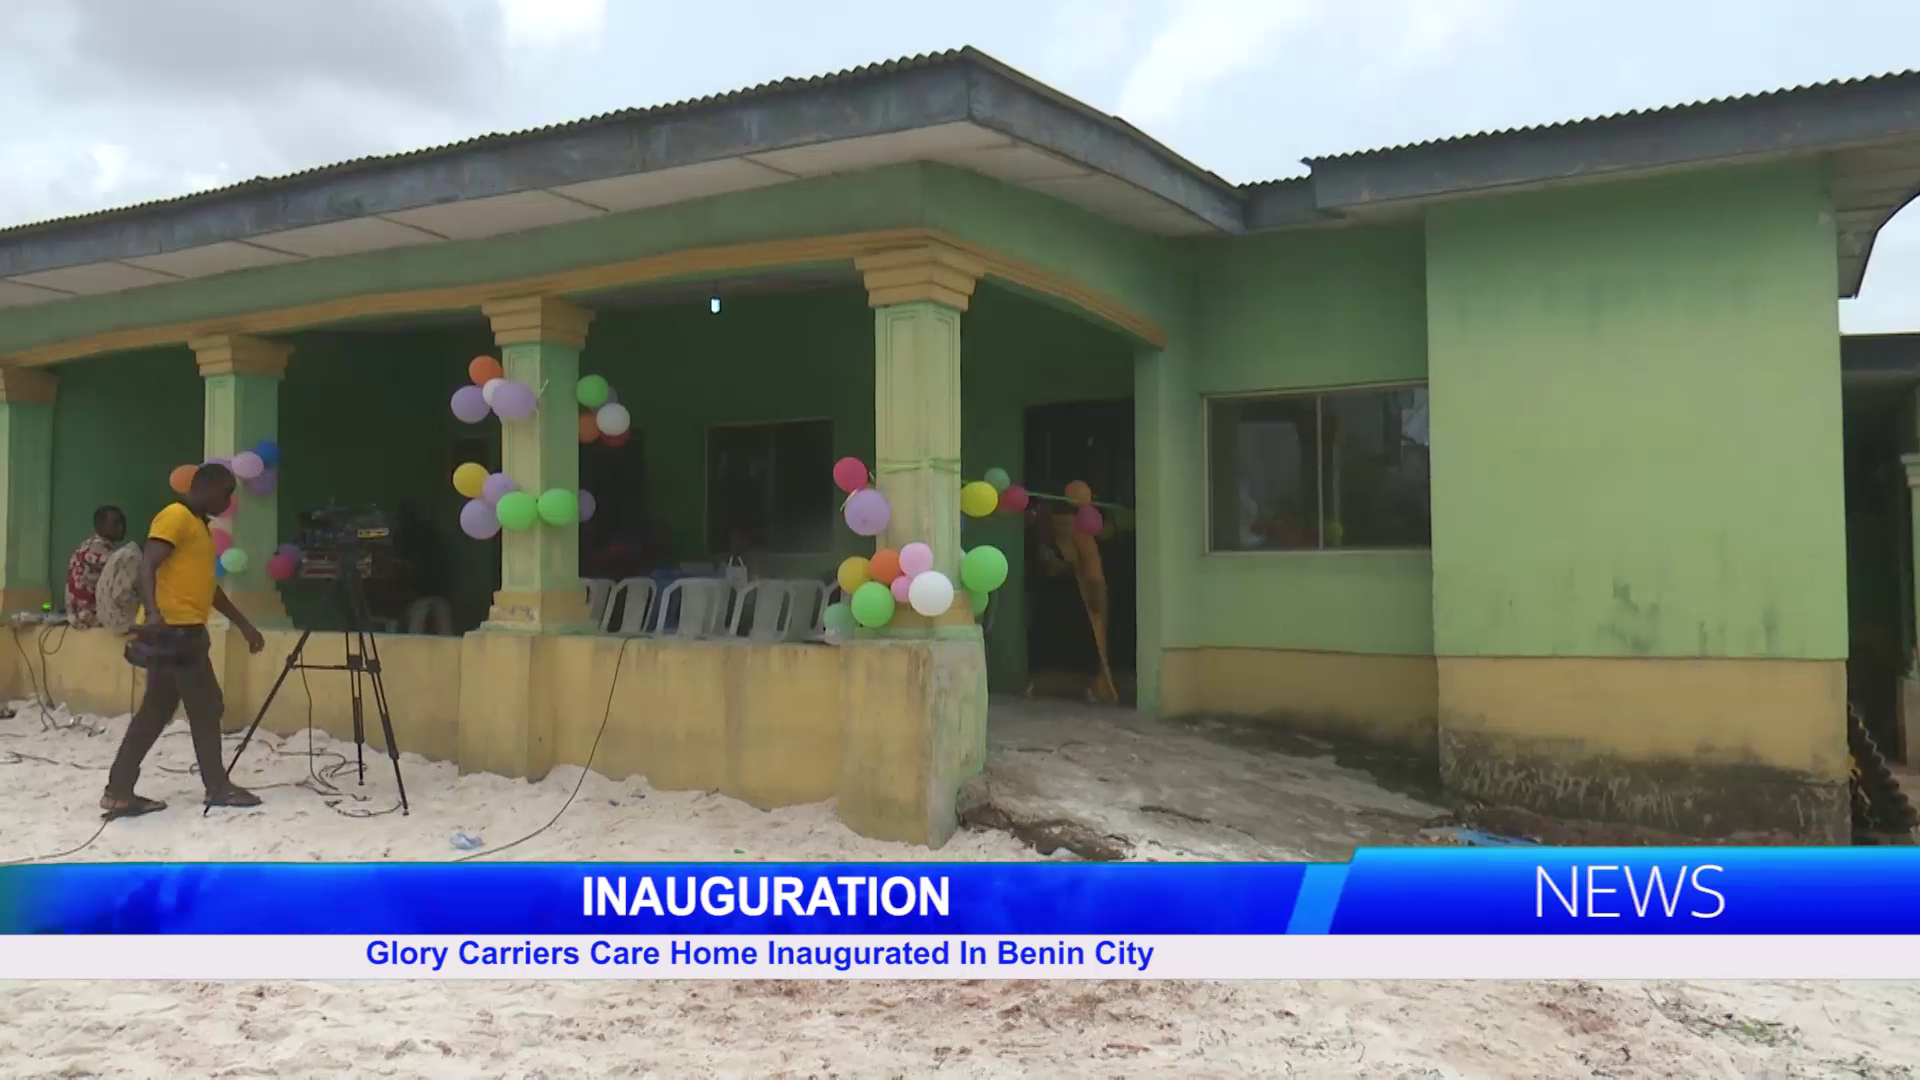 Glory Carriers Care Home Inaugurated In Benin City